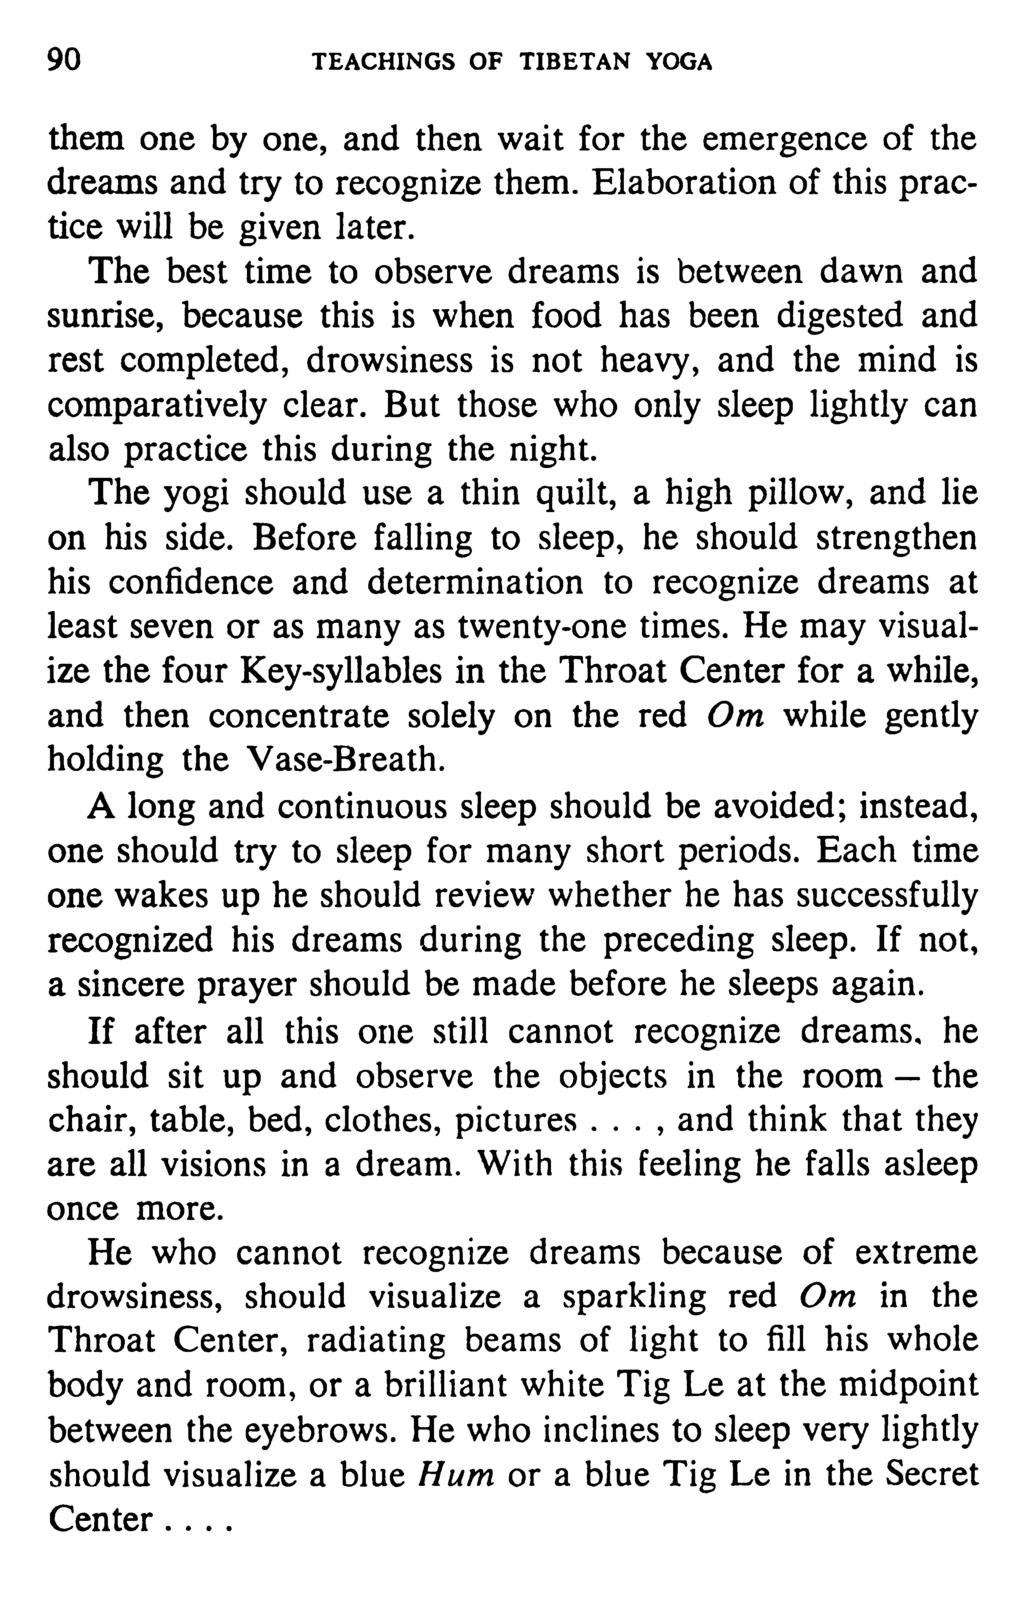 90 TEACHINGS OF TIBETAN YOGA them one by one, and then wait for the emergence of the dreams and try to recognize them. Elaboration of this practice will be given later.